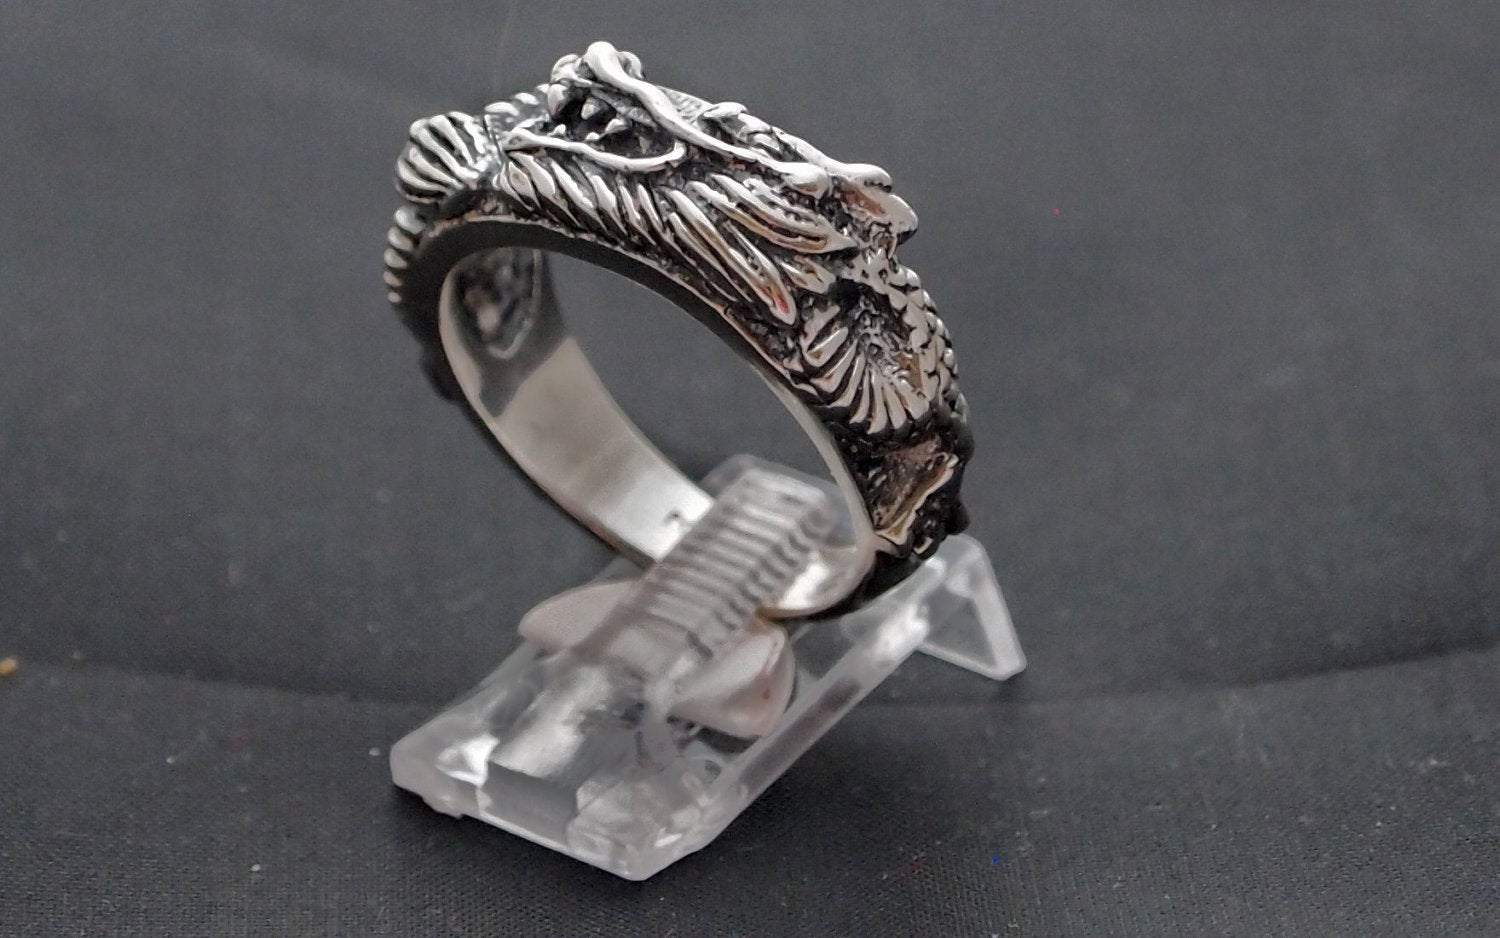 Asian Dragon Band In Sterling Silver or Antique Bronze, Silver Dragon Ring, Asian Dragon Ring, Silver Dragon Band, Here Be Dragons, Silver Fantasy Jewelry, Silver Fantasy Jewellery, 925 Silver Dragon Ring, Chinese Dragon Ring, Mens Dragon Ring, Mens Silver Dragon Ring, Mens Silver Dragon Jewelry, Mens Silver Dragon Jewellery